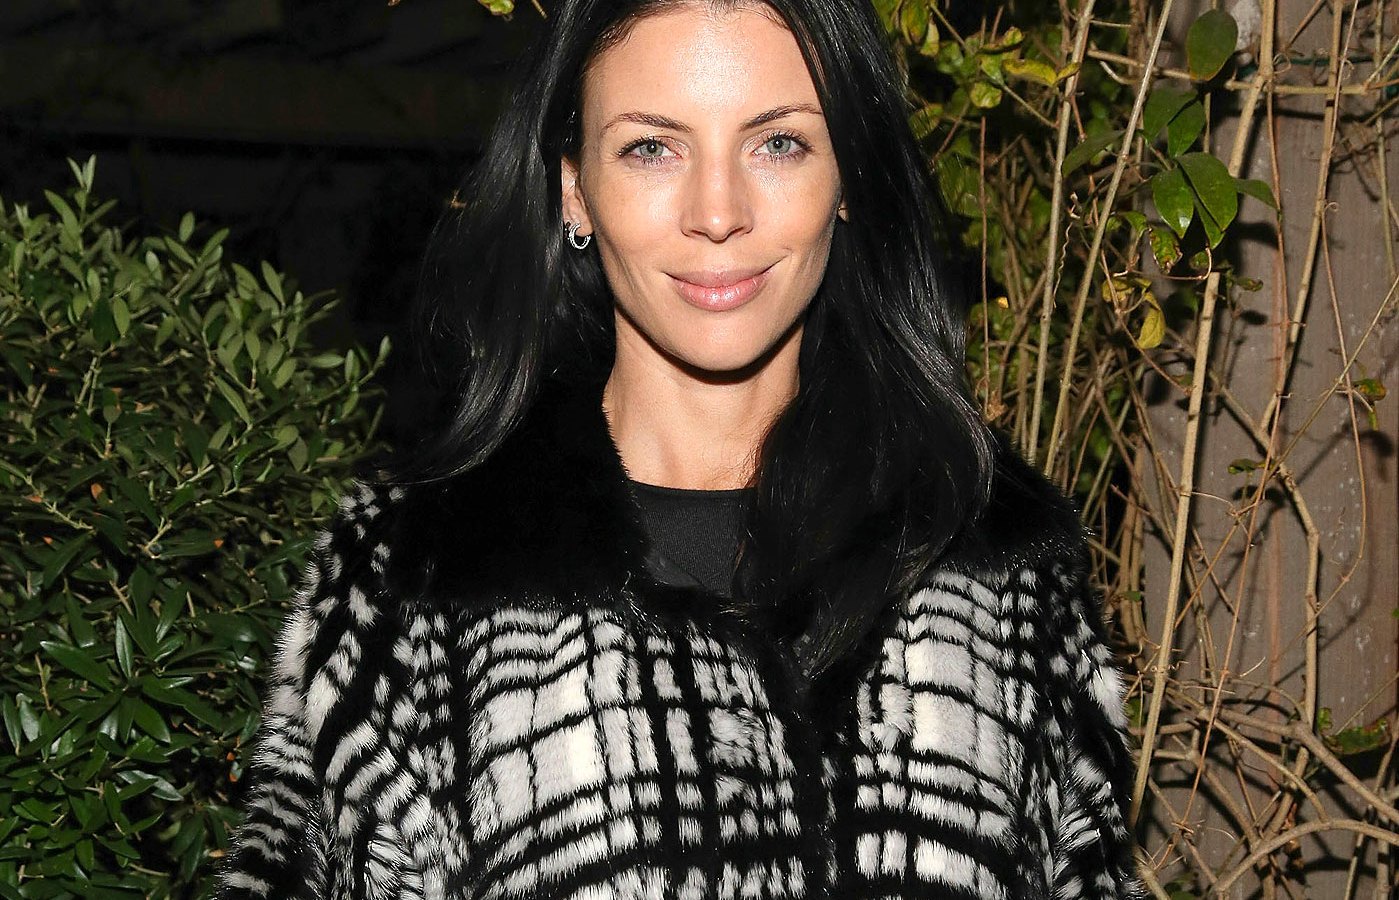 Liberty Ross attends Laura Wasser's Book Party on October 8, 2013